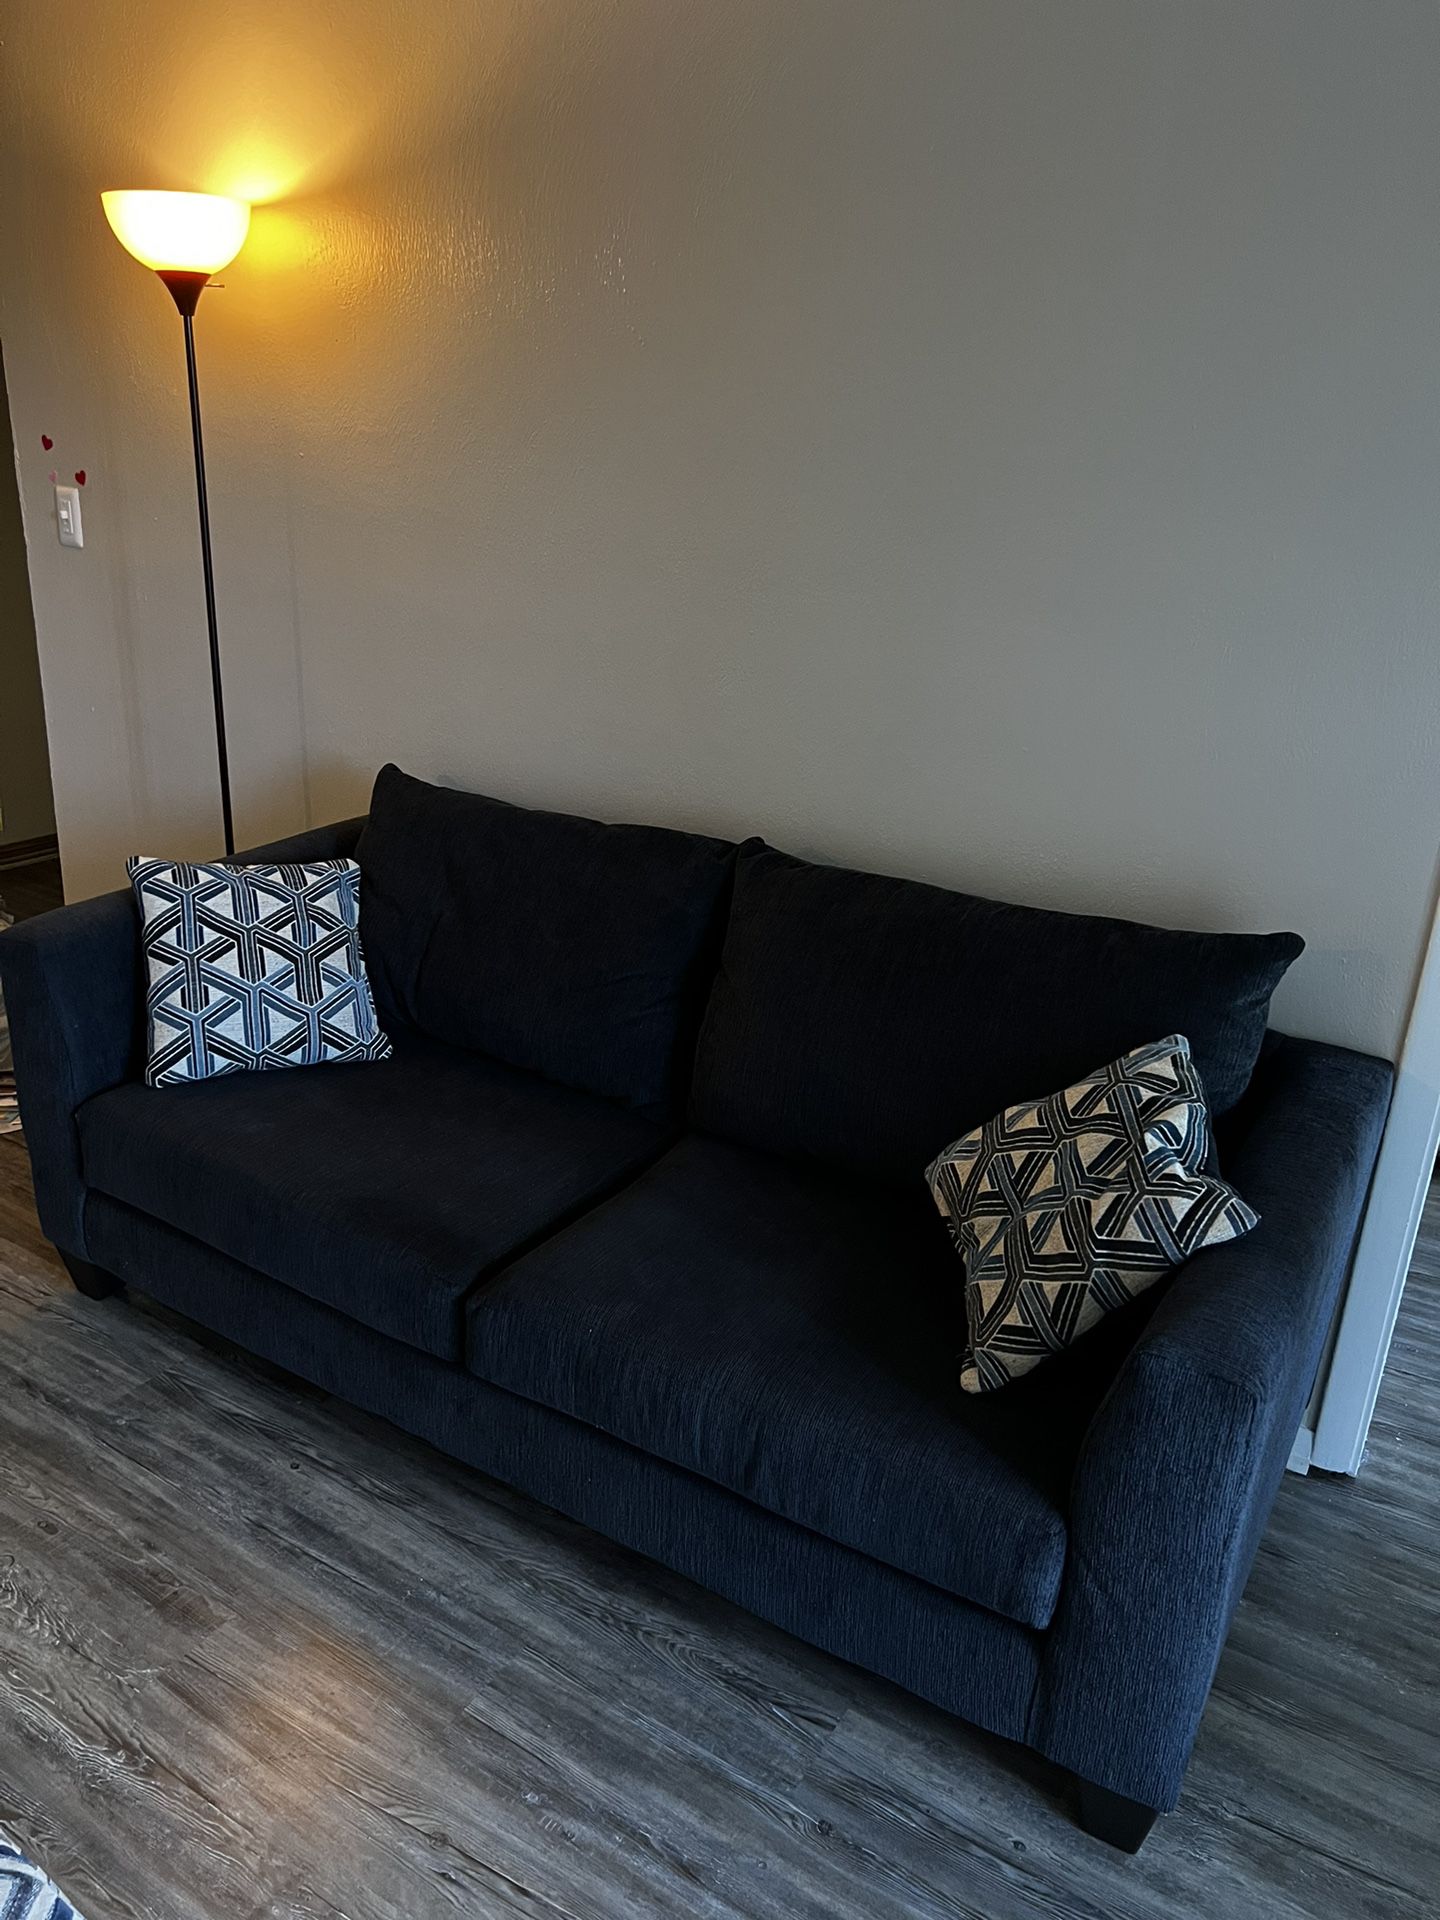 Loveseat couch